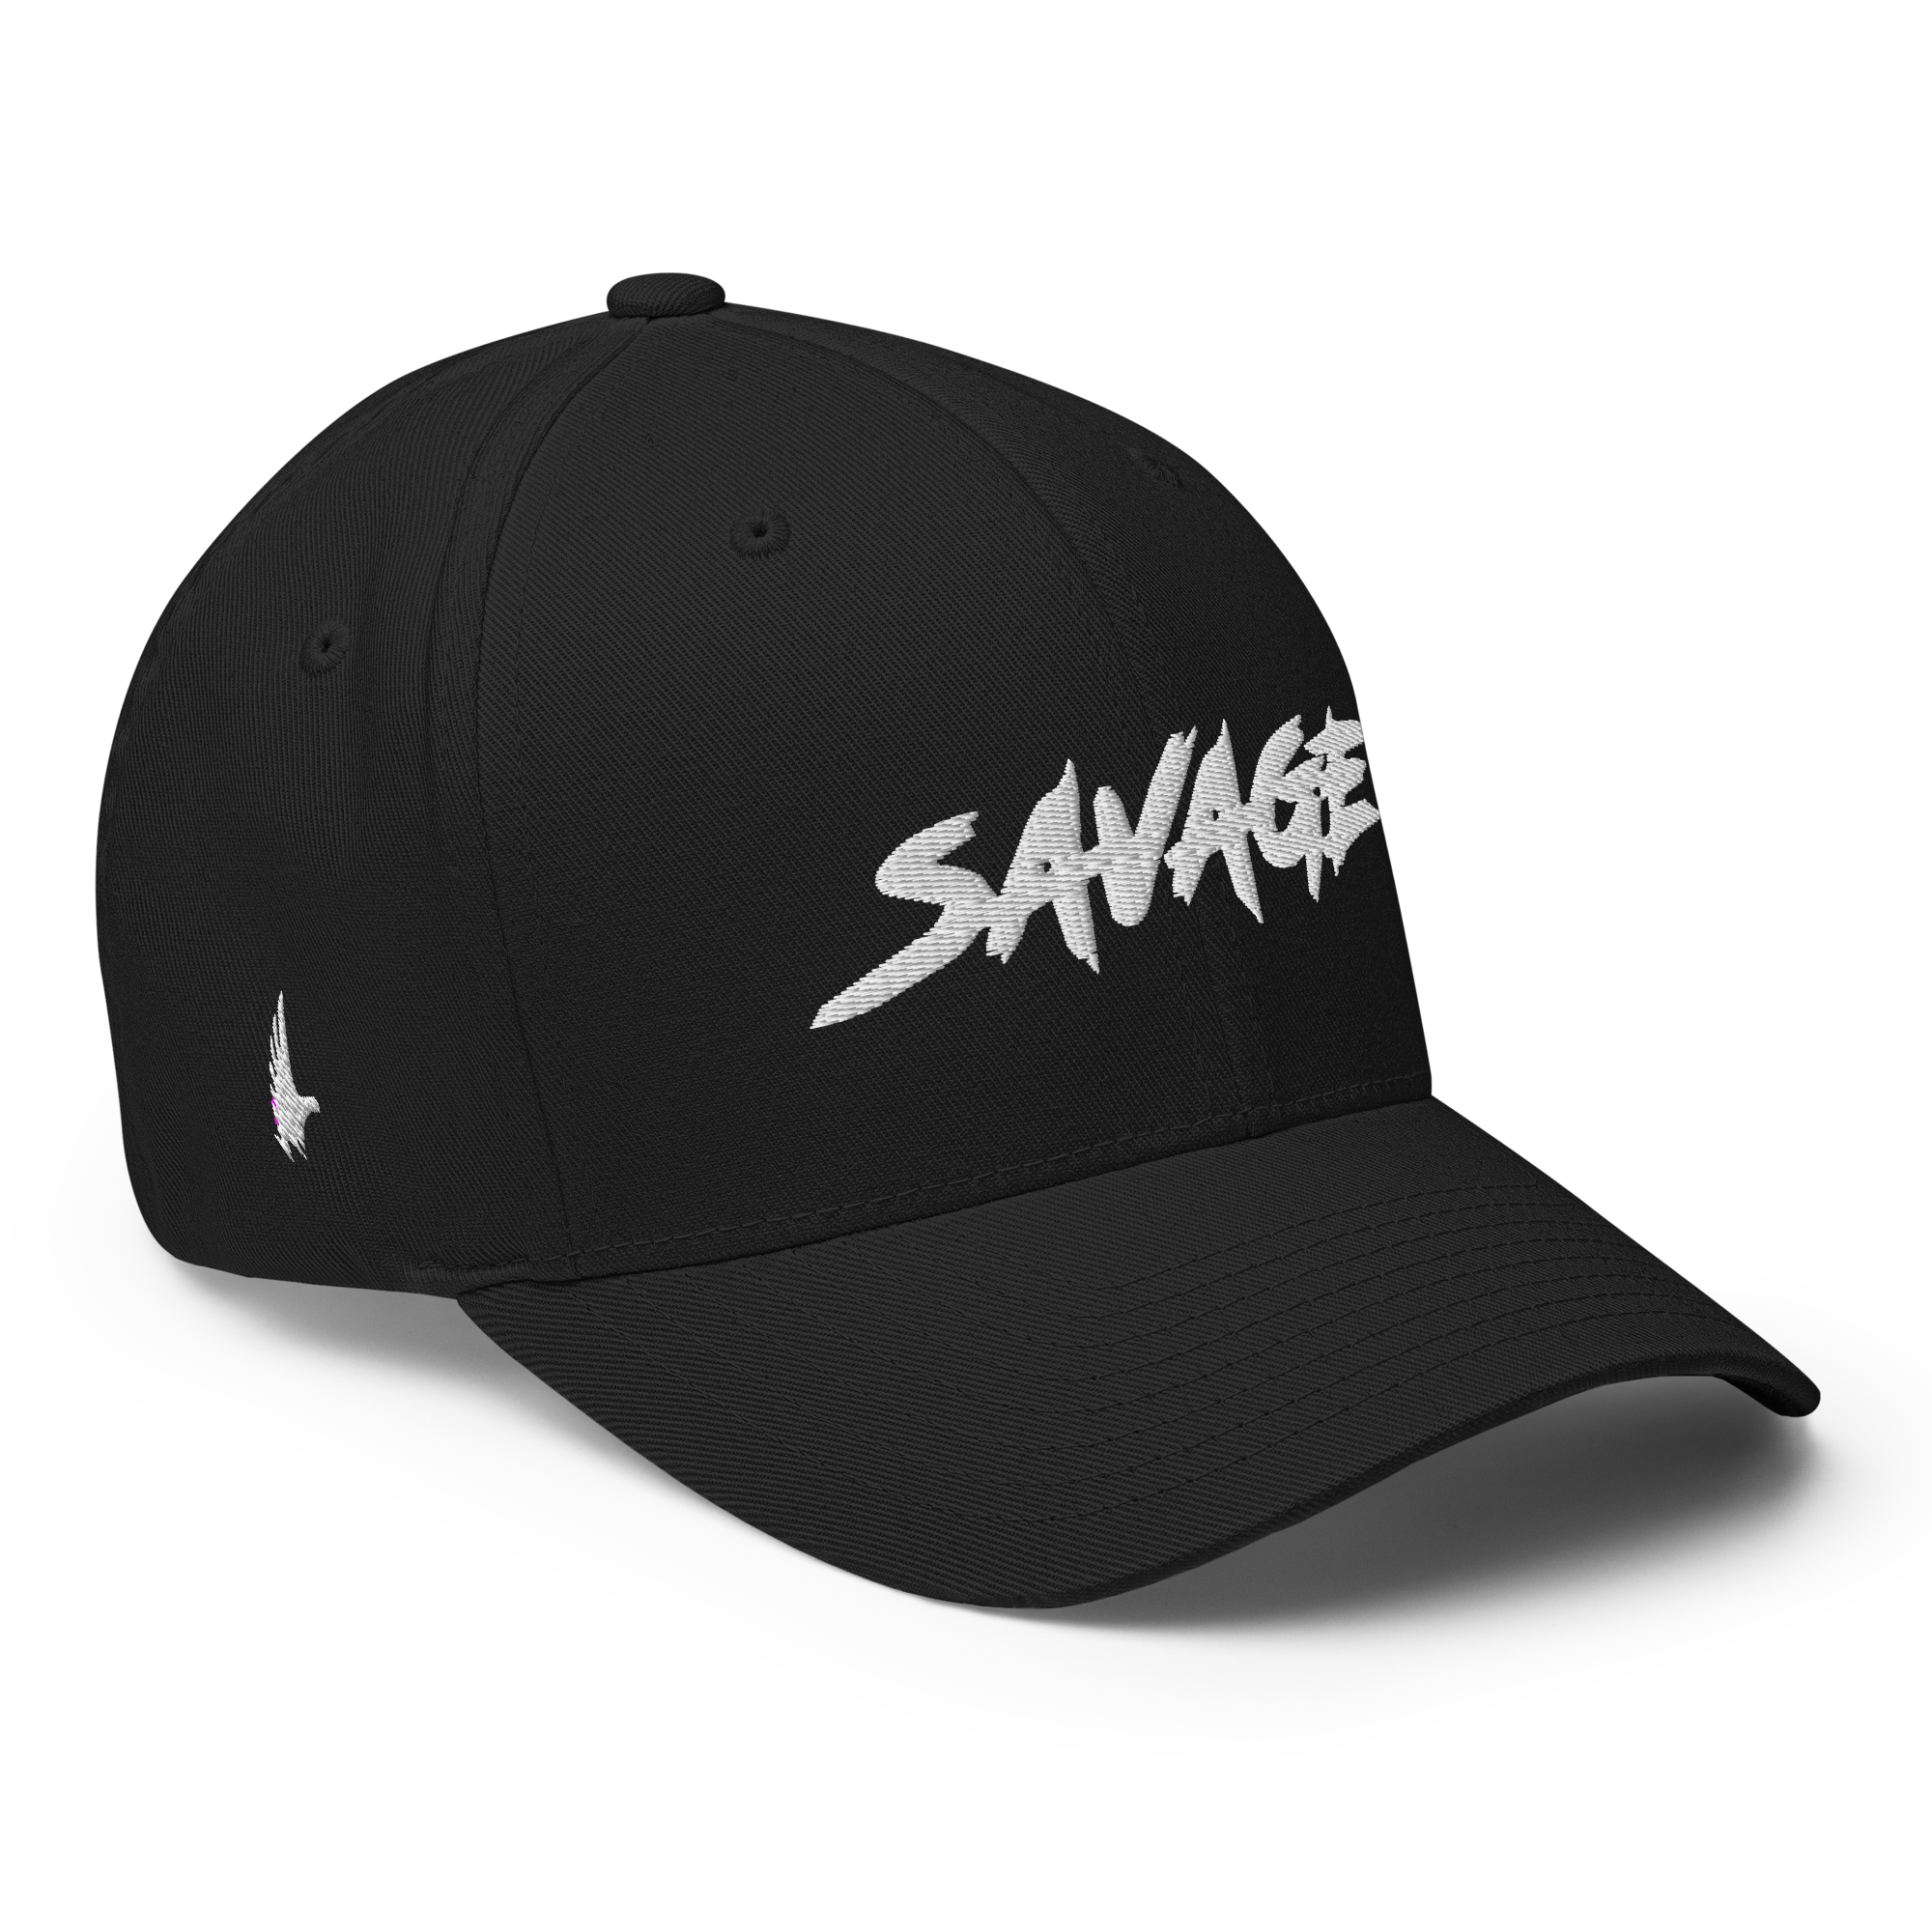 Savage Fitted Hat Black - Loyalty Vibes